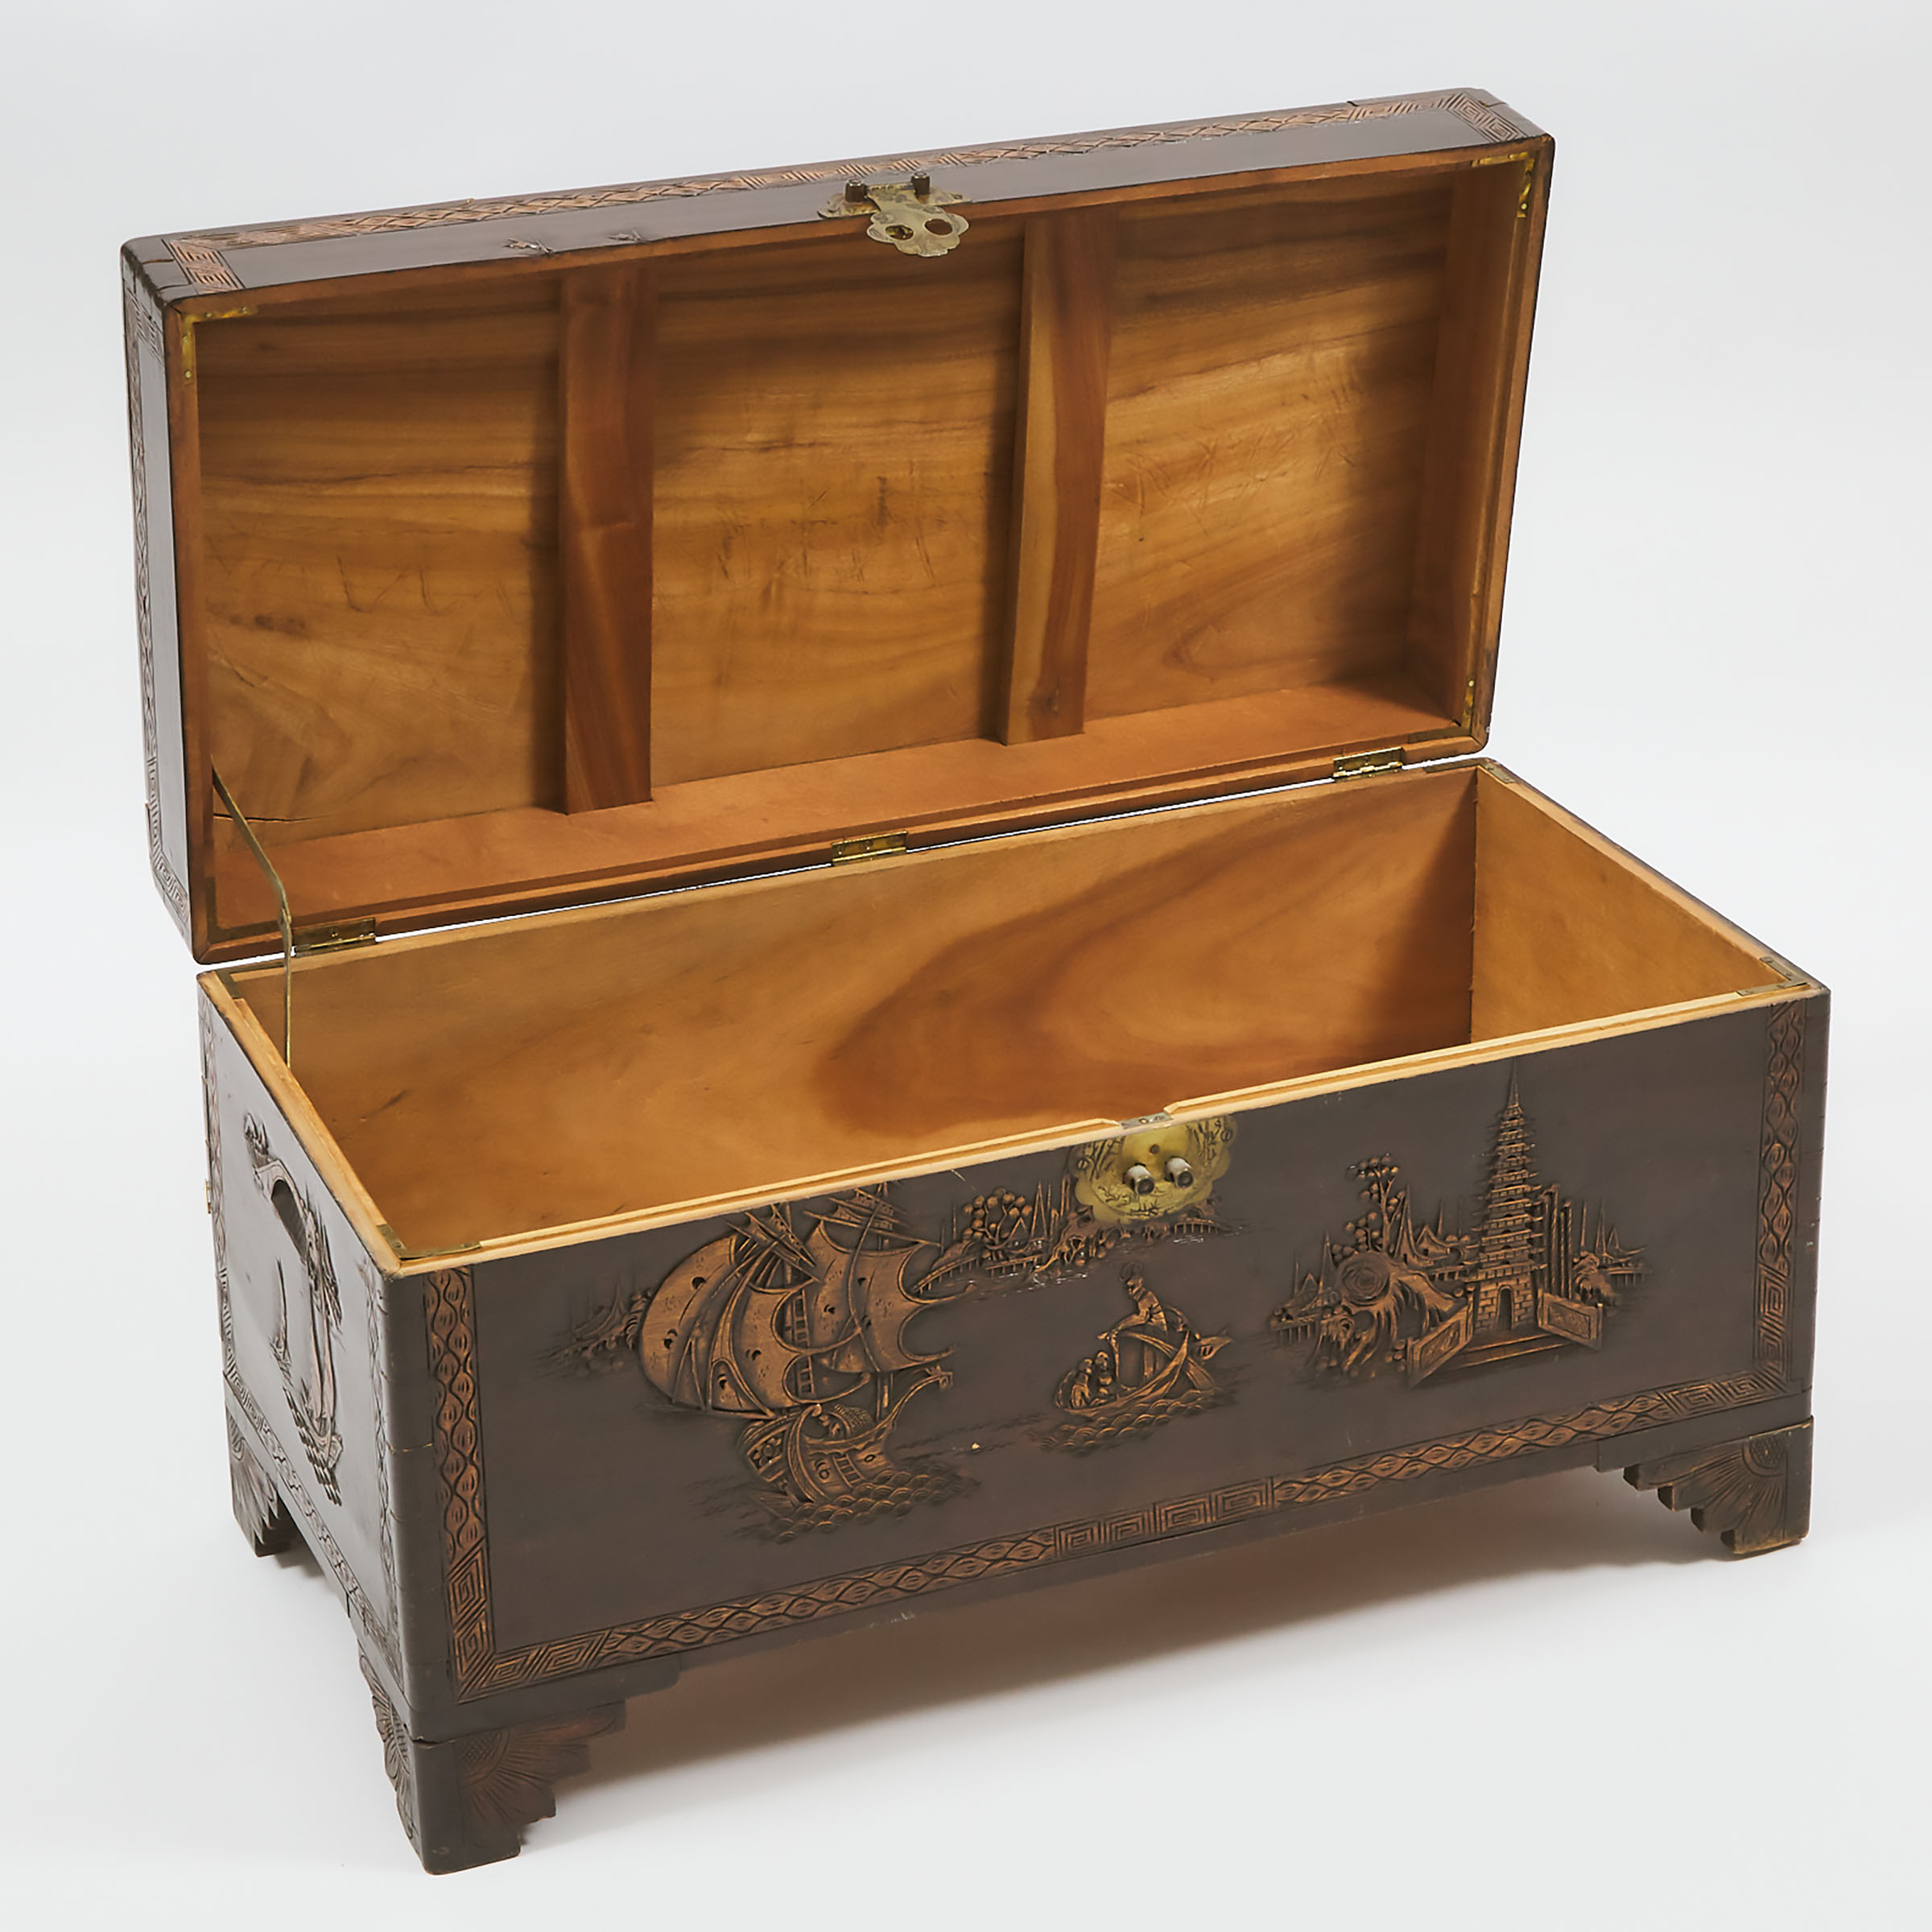 A Chinese Carved Wood Storage Chest, Early 20th Century